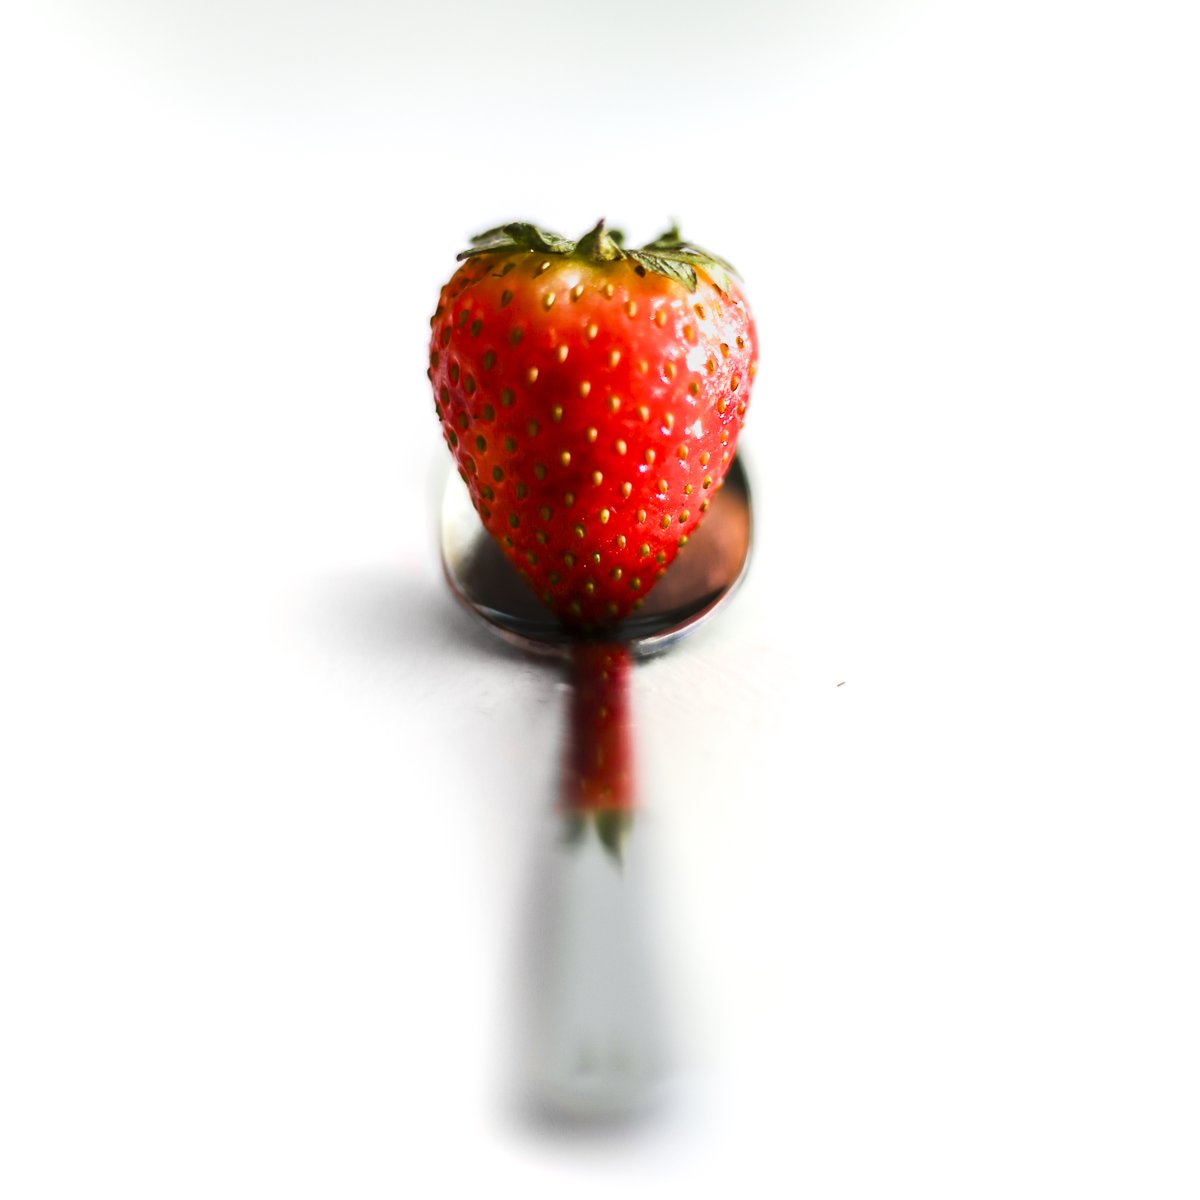 testing out a new toy - finally bought a full frame camera so here is a picture of a strawberry on a spoon #fsprintmonday #Sharemondays2024